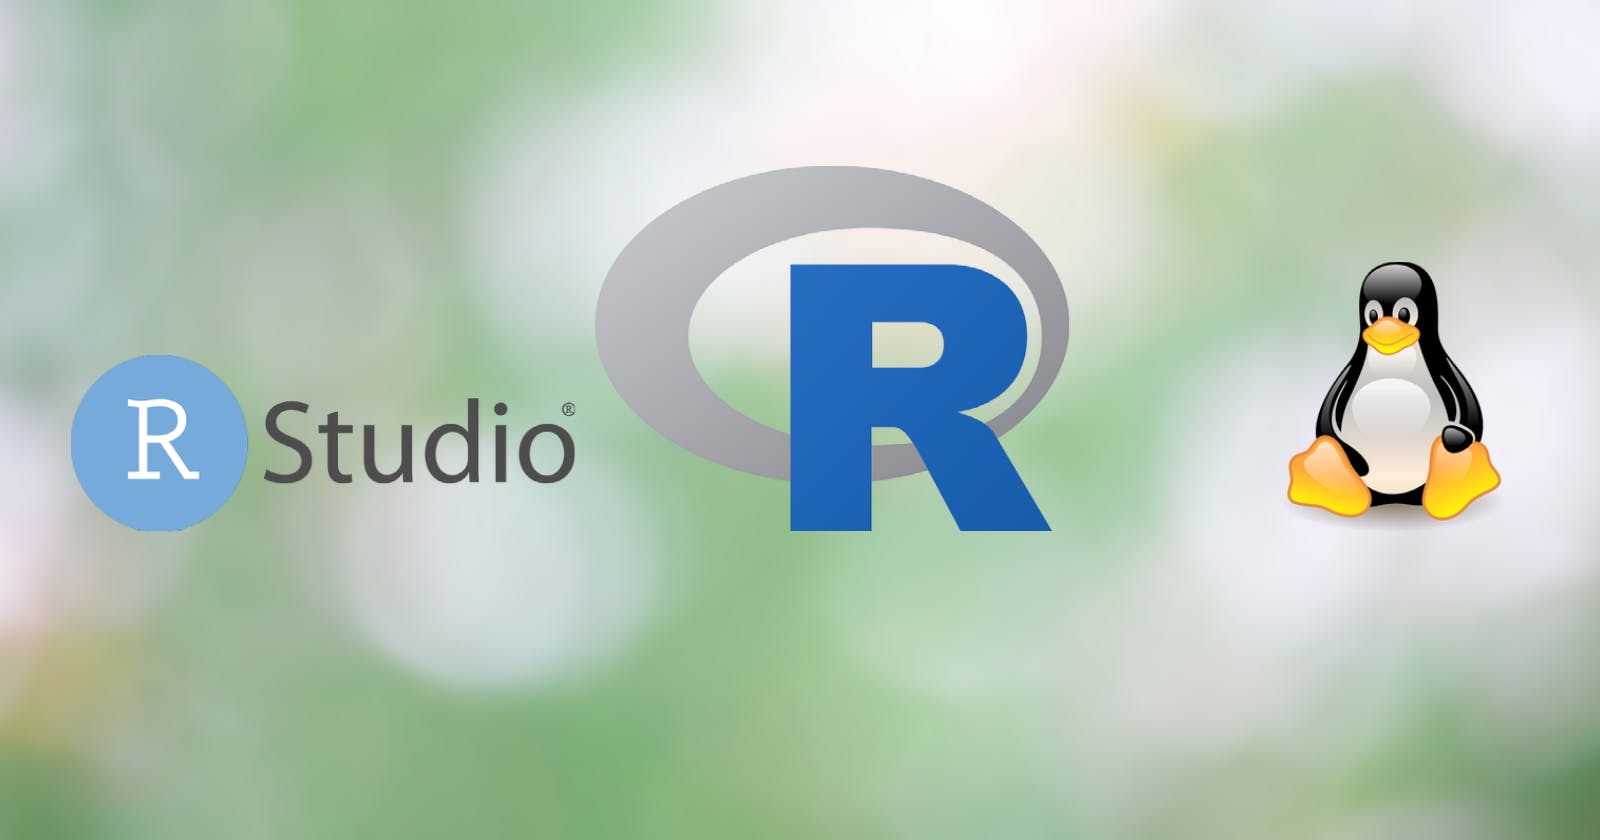 How to install R and R Studio on Linux